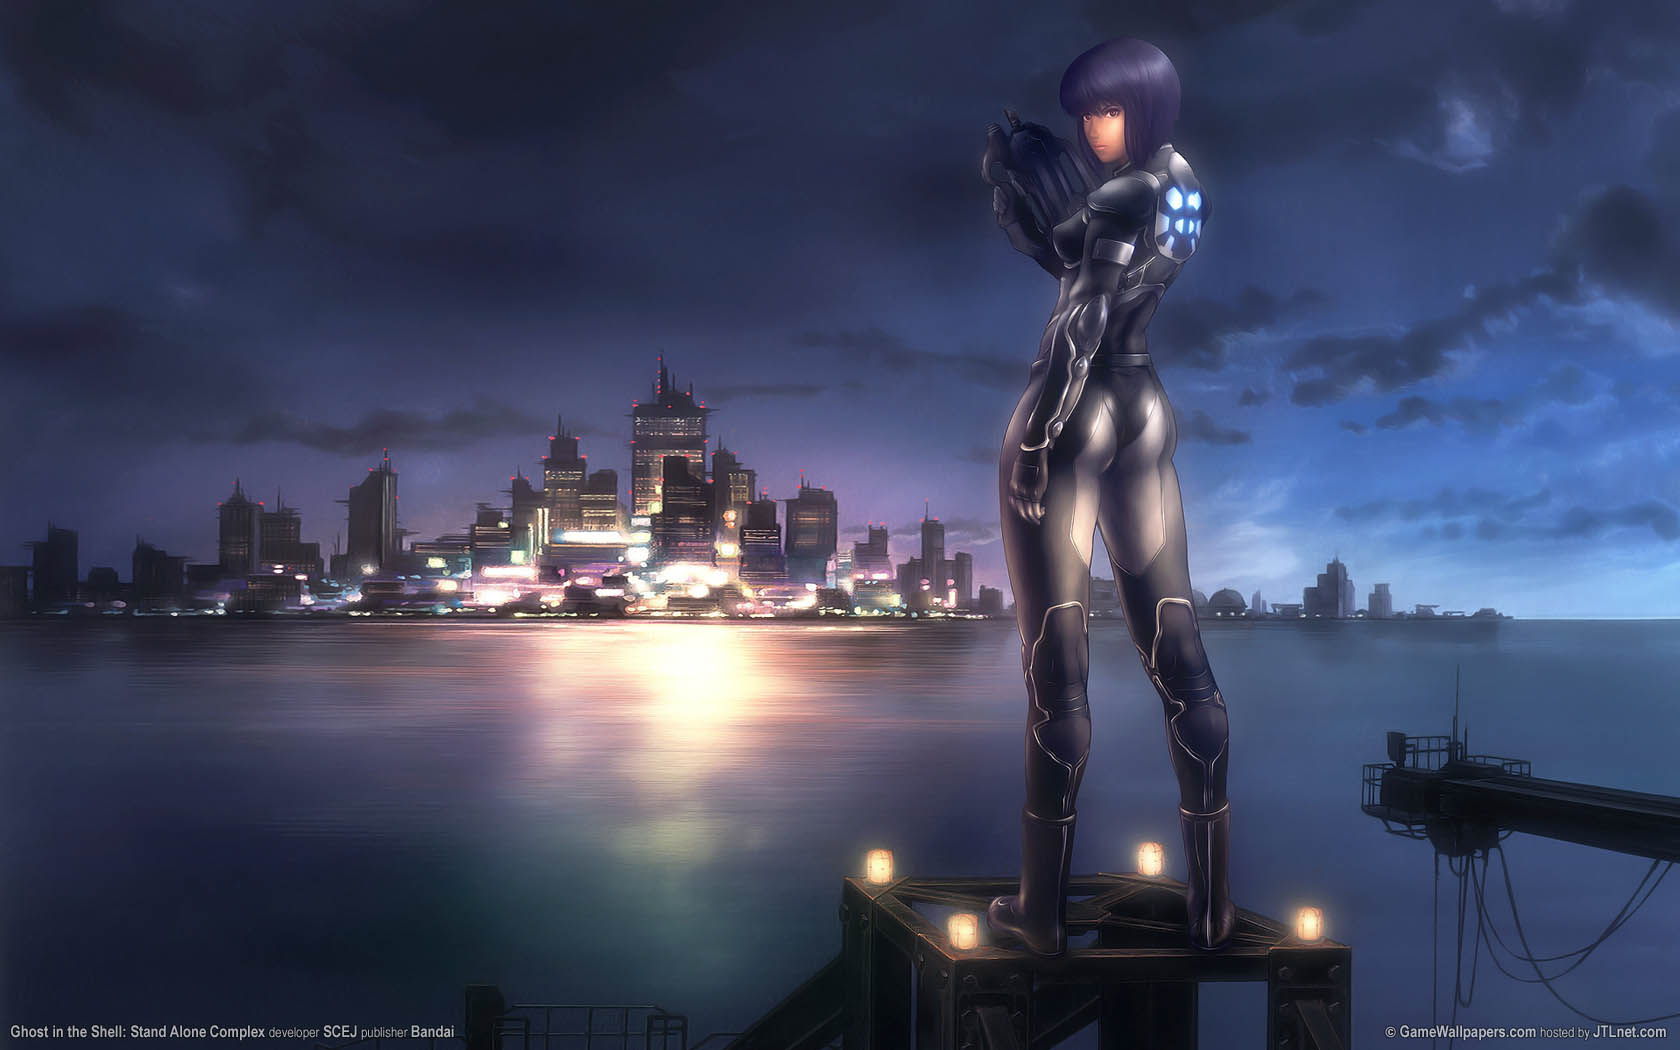 Ghost in the Shell: Stand Alone Complex fond d'cran 01 1680x1050